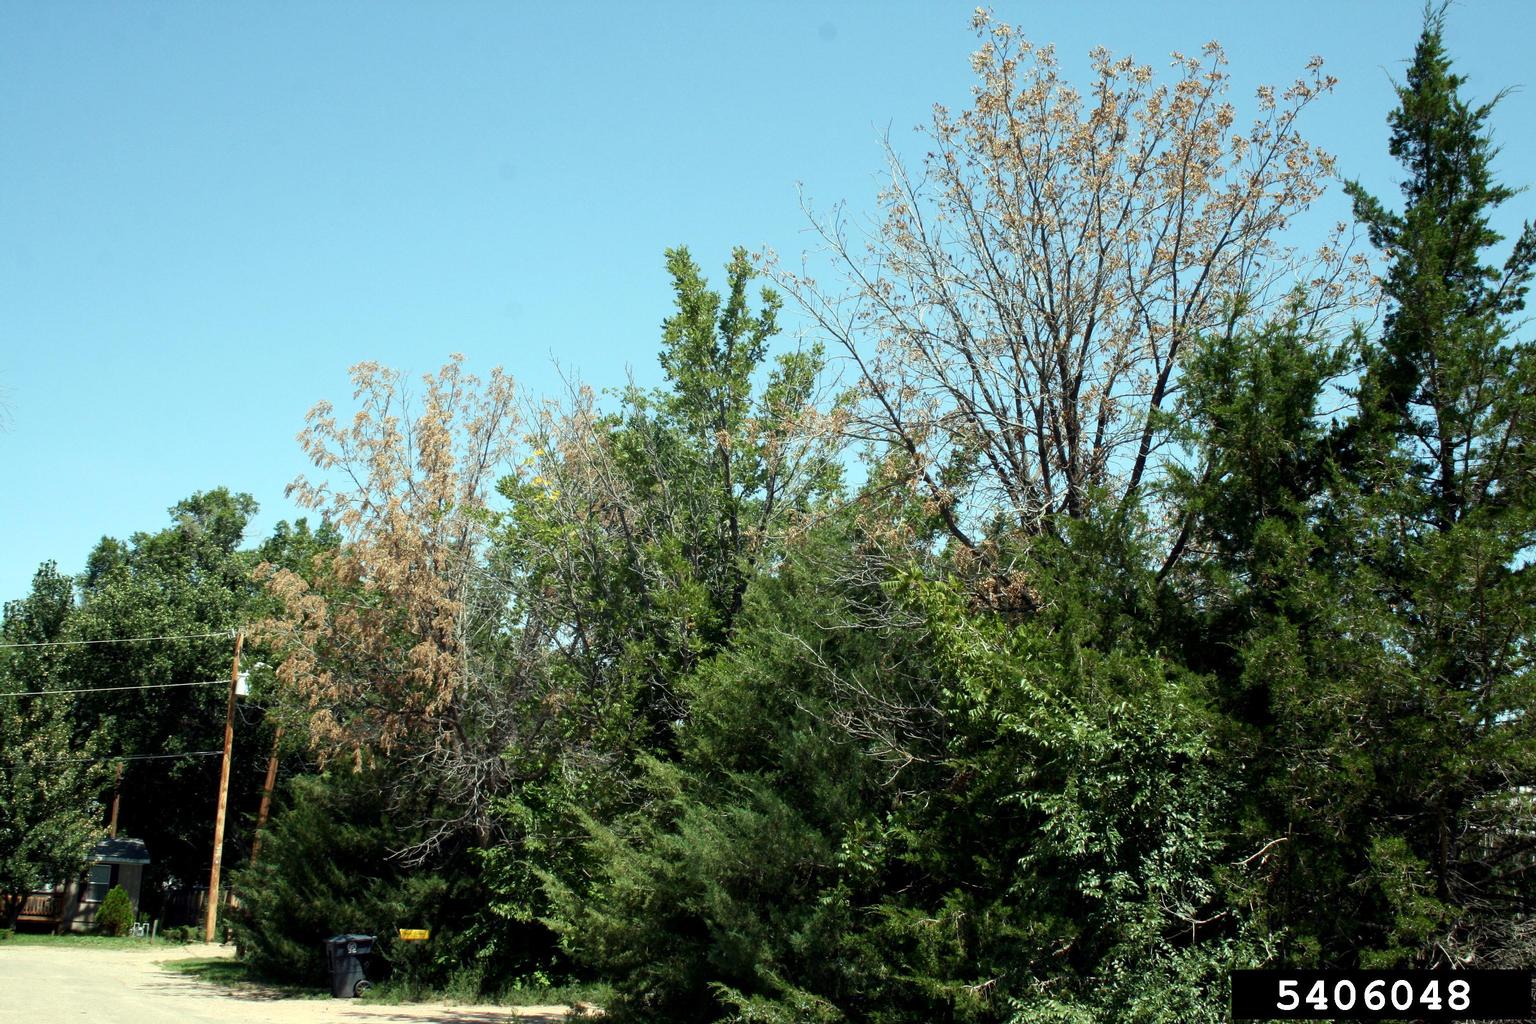 Black walnut killed by thousand-cankers disease